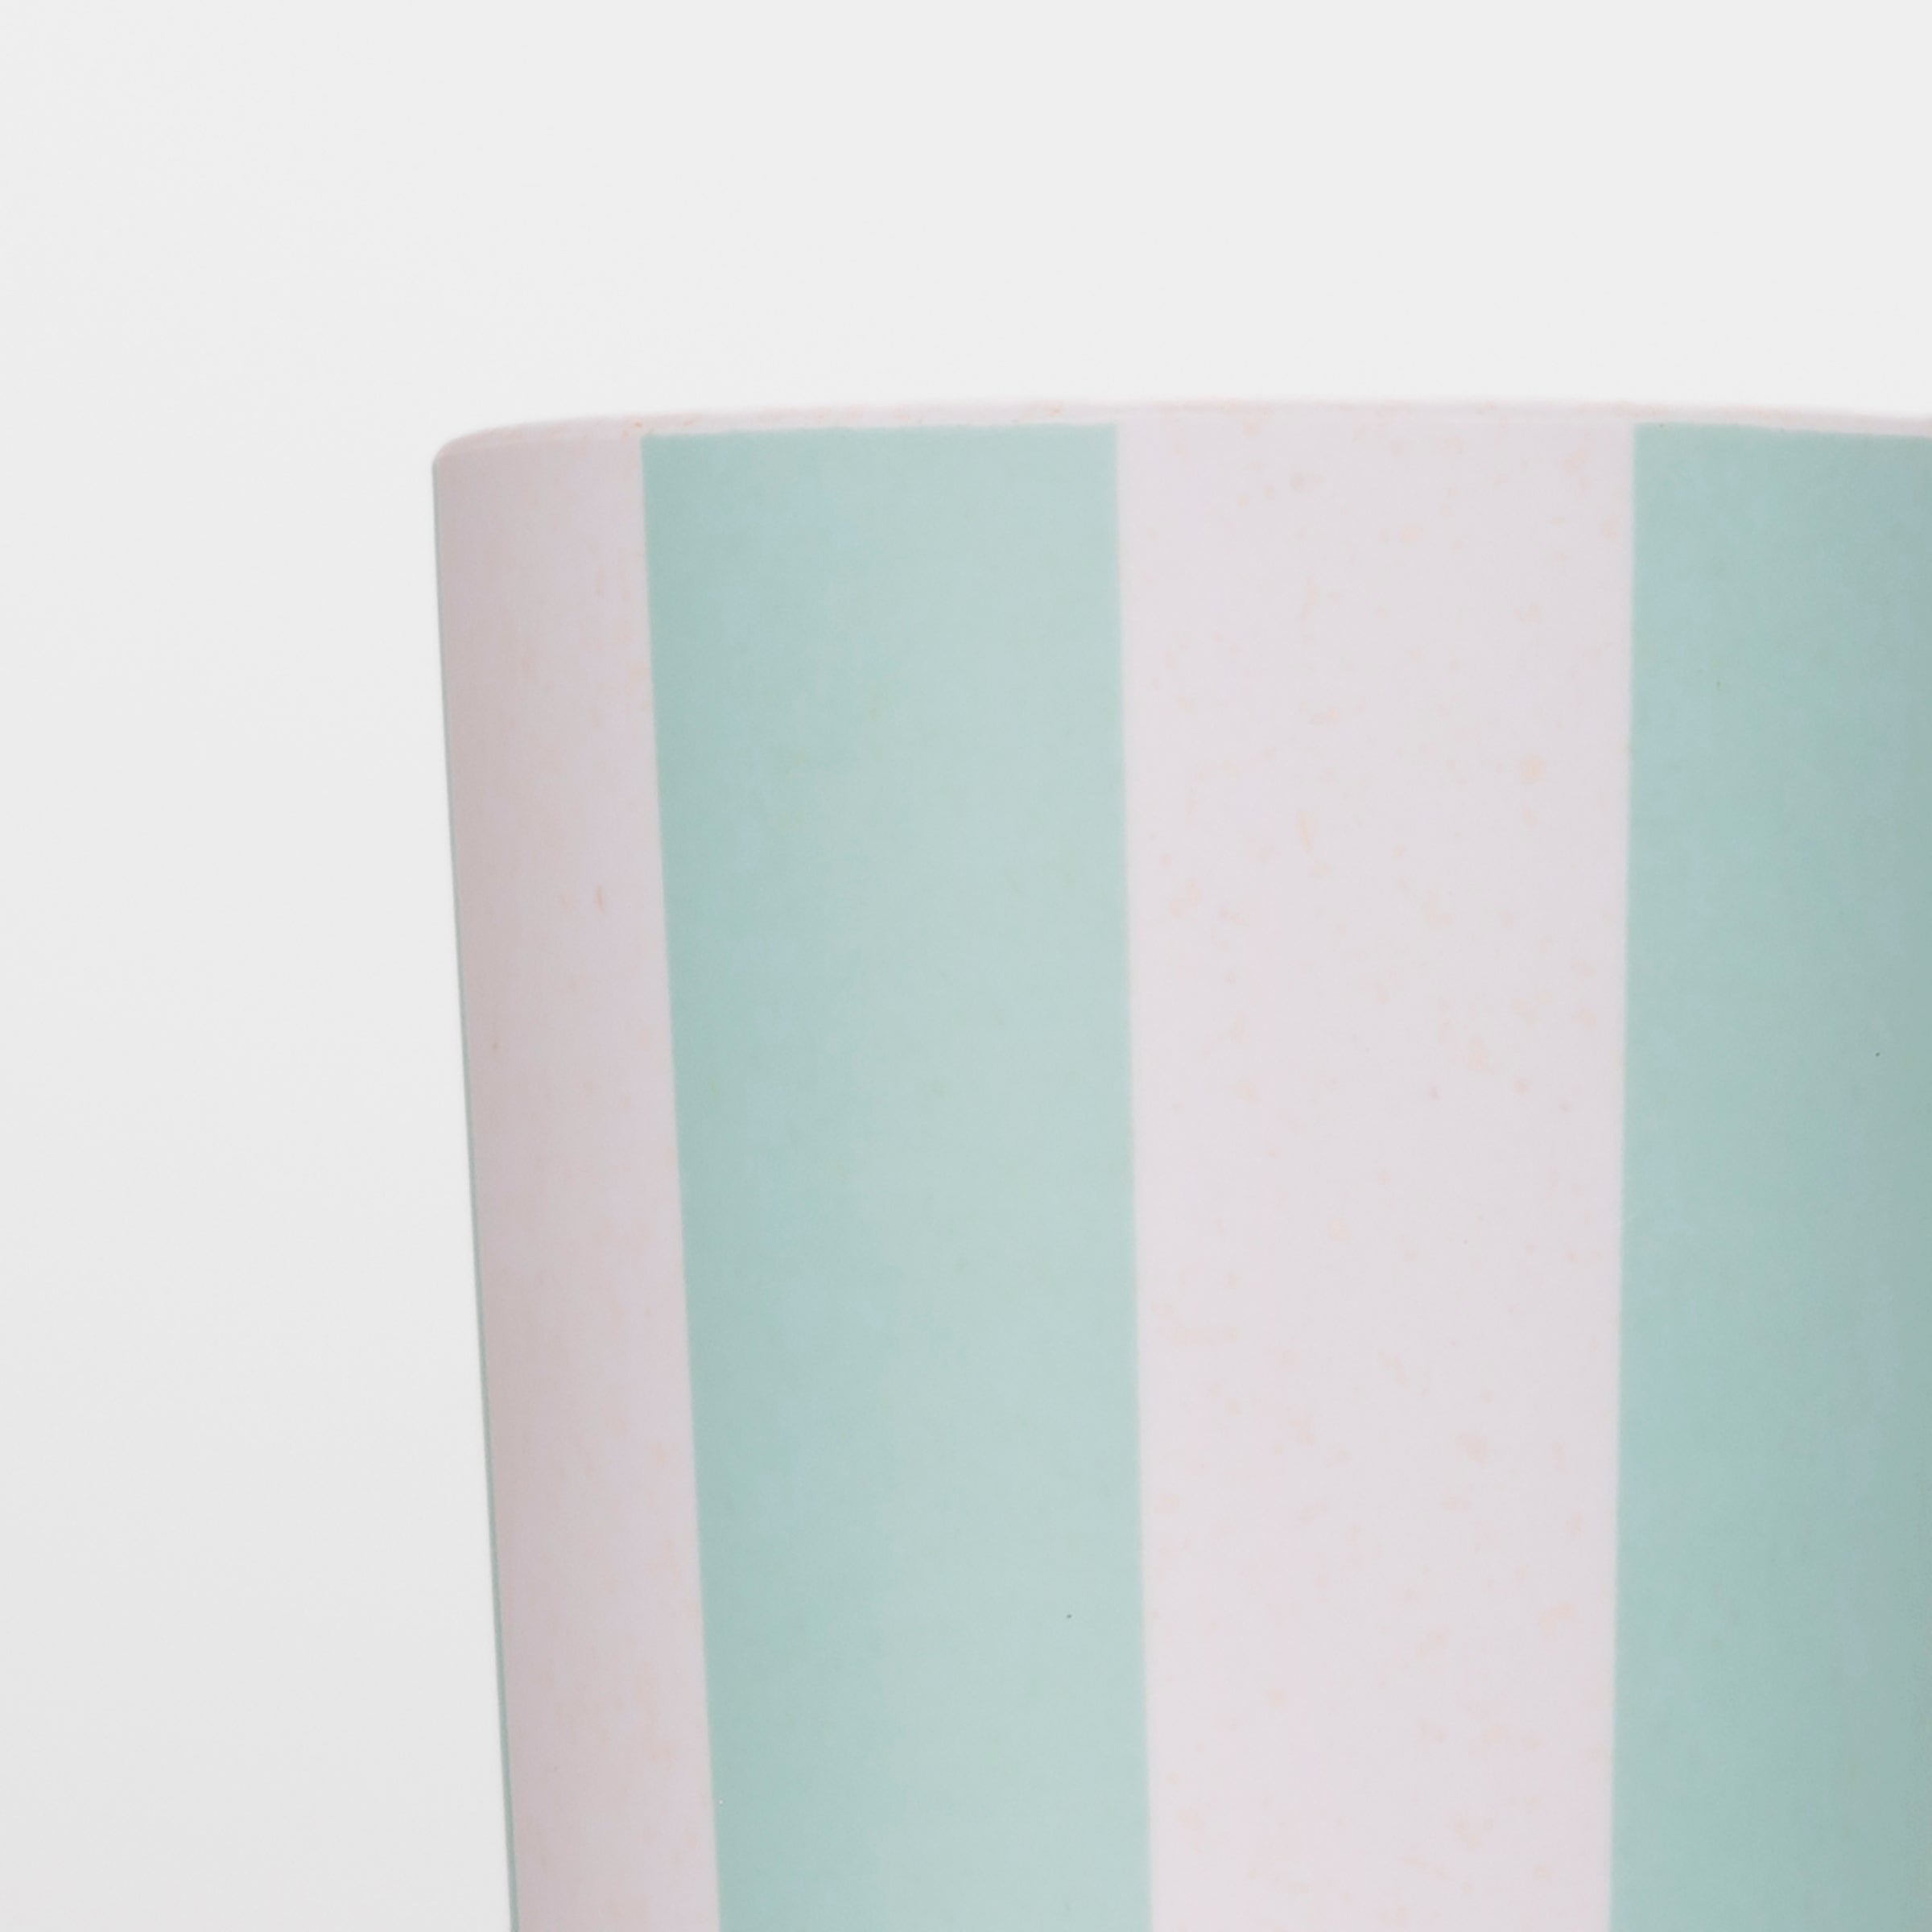 Our party cups have on trend stripes and are made from a bamboo mix so are reusable for party after party.